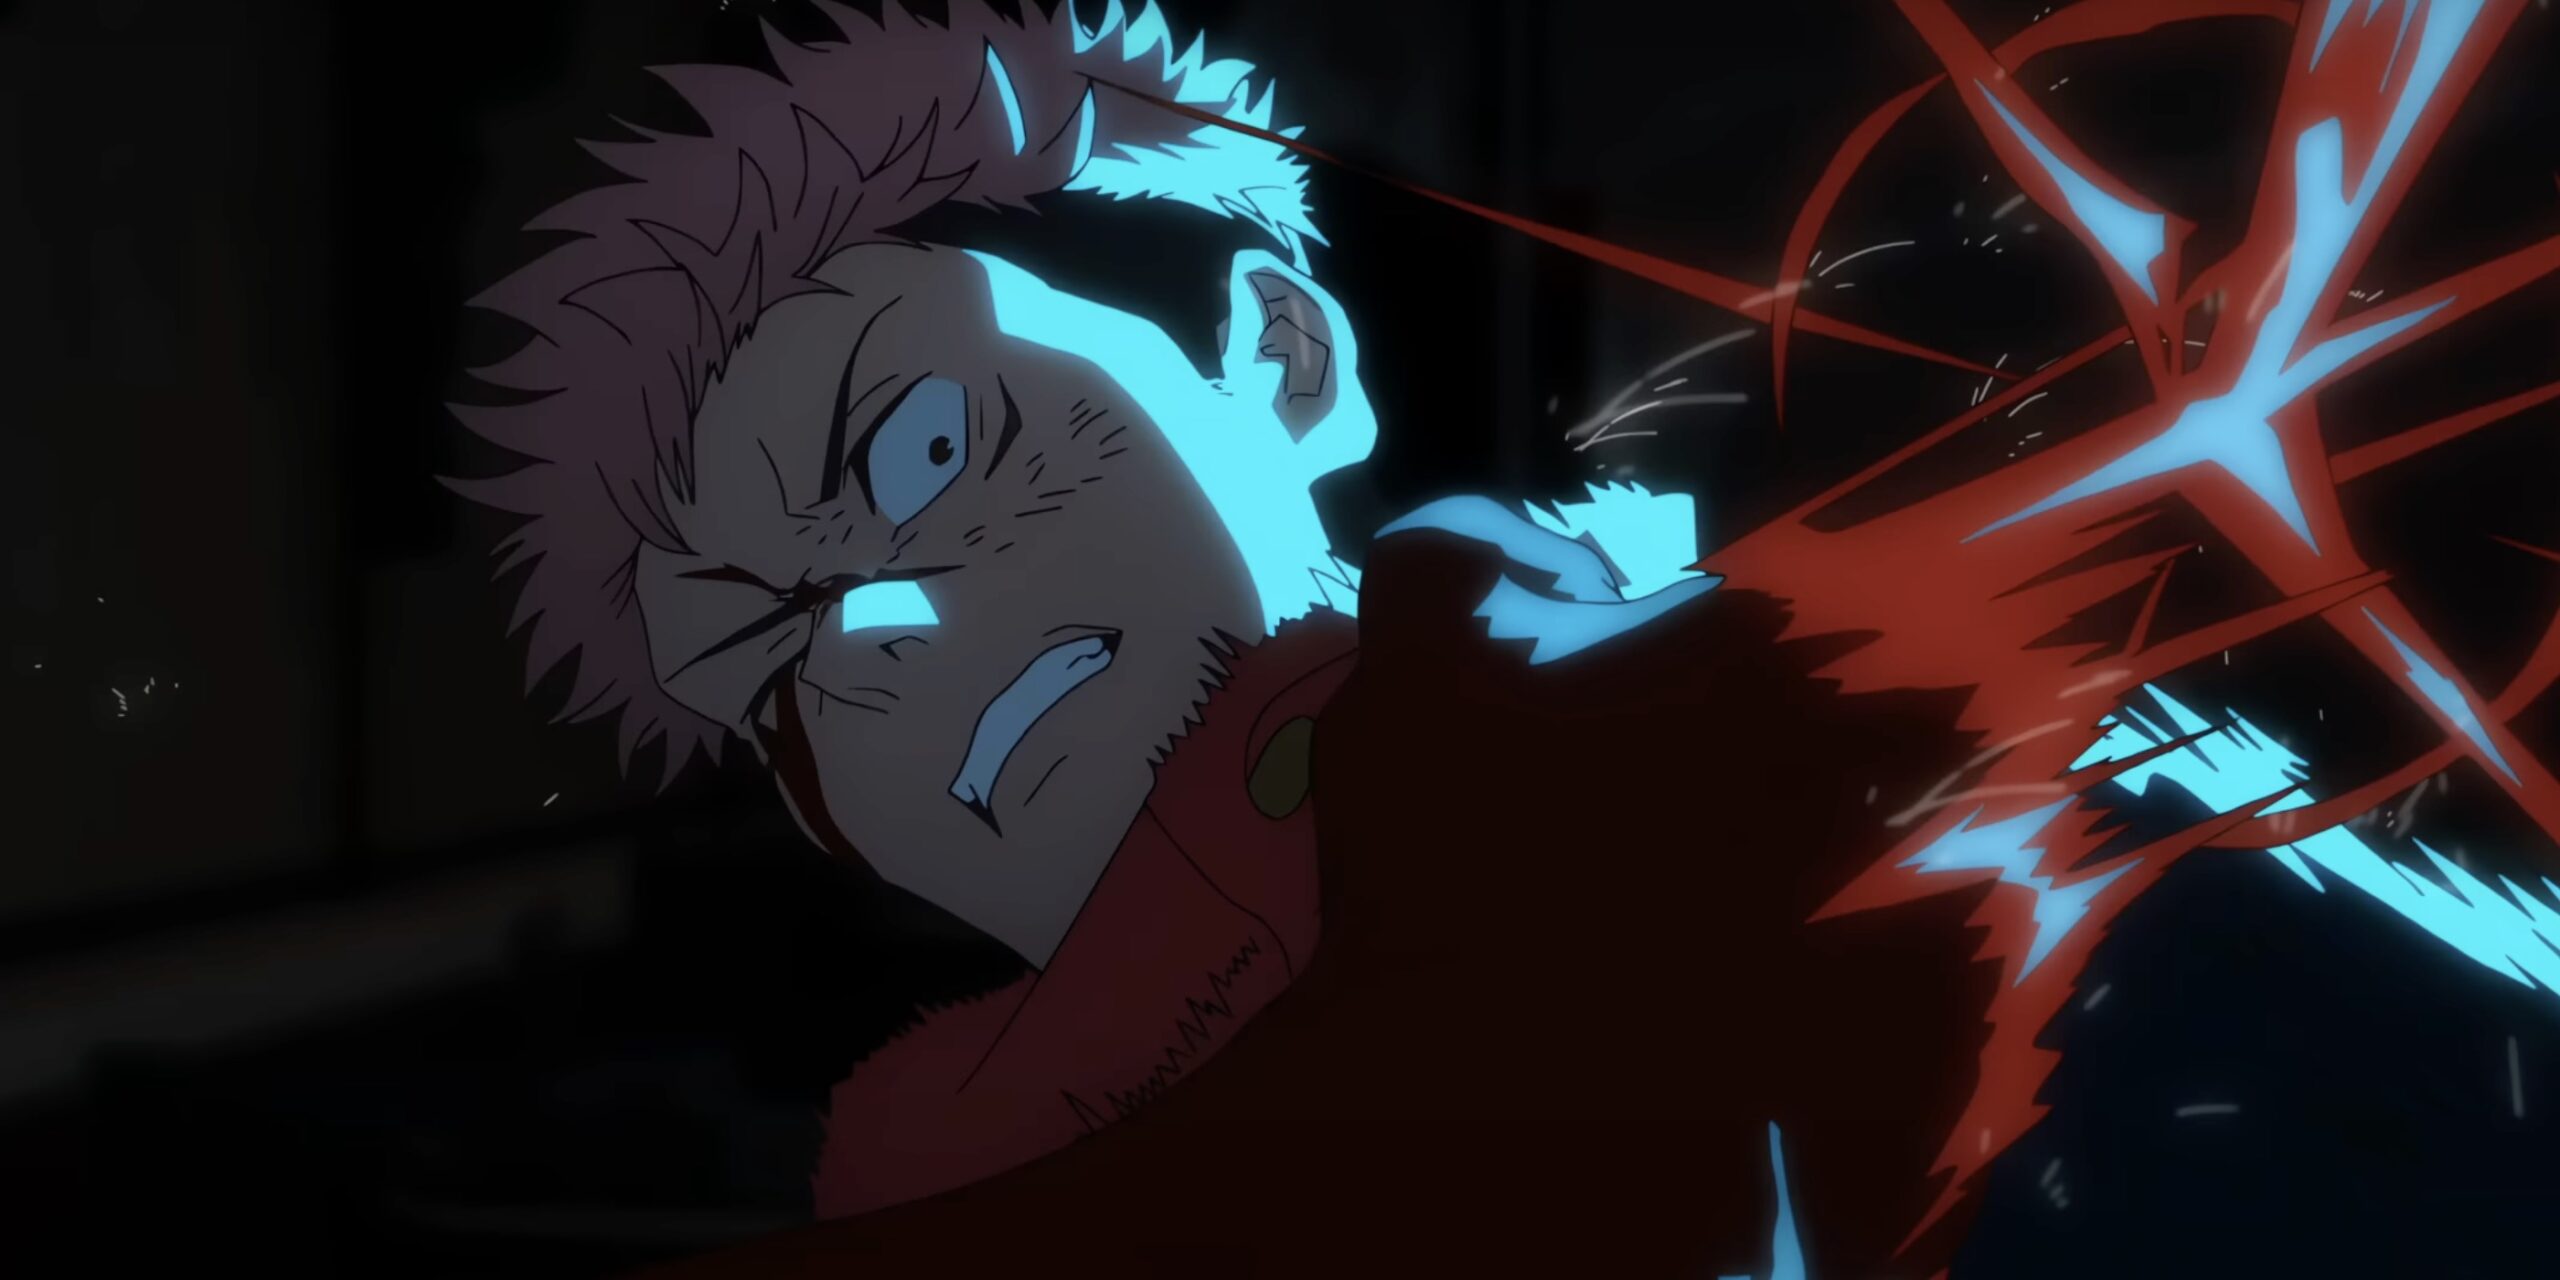 Jujutsu Kaisen Season 2 would not be possible without this person